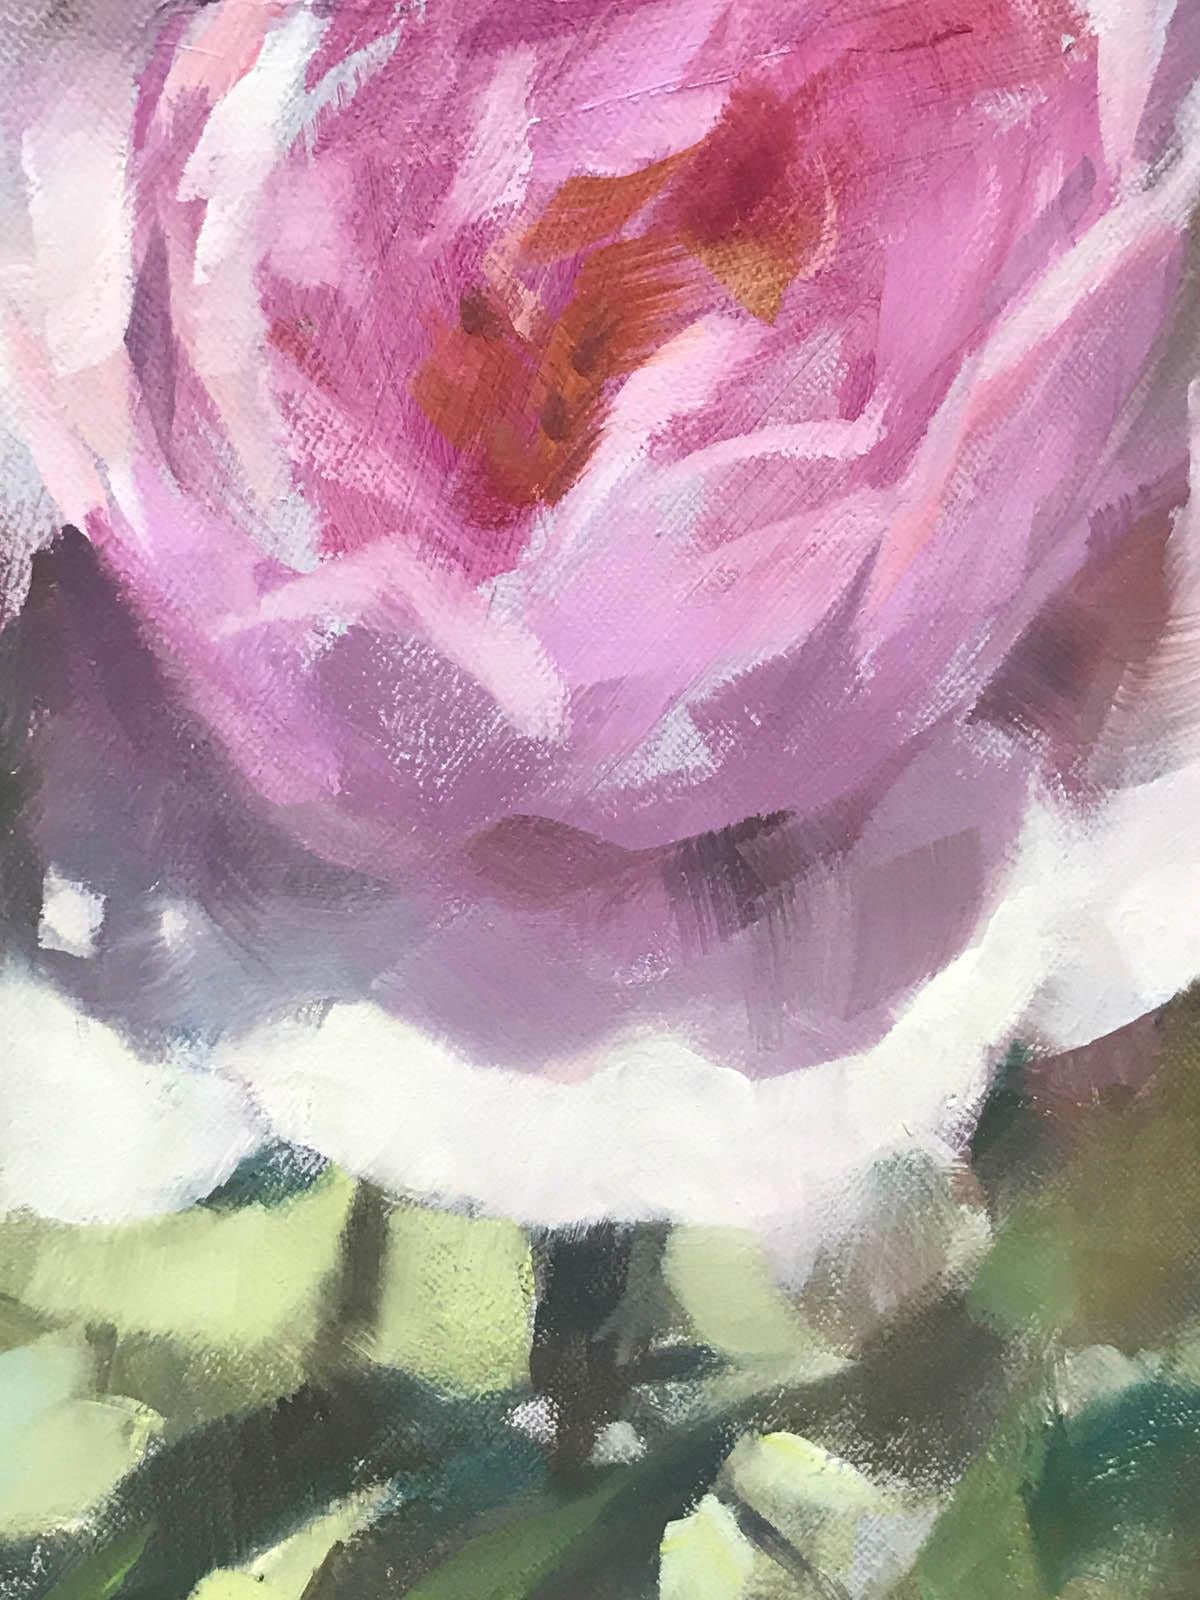 Pink Roses at Kew, Trevor Waugh
Original Oil Painting
Oil on Canvas
Unframed
Size: H 91.5cm (36 inches) x W 122cm (48 inches)
Please note that in situ images are purely an indication of how a piece may look.

Pink Roses at Kew is an original